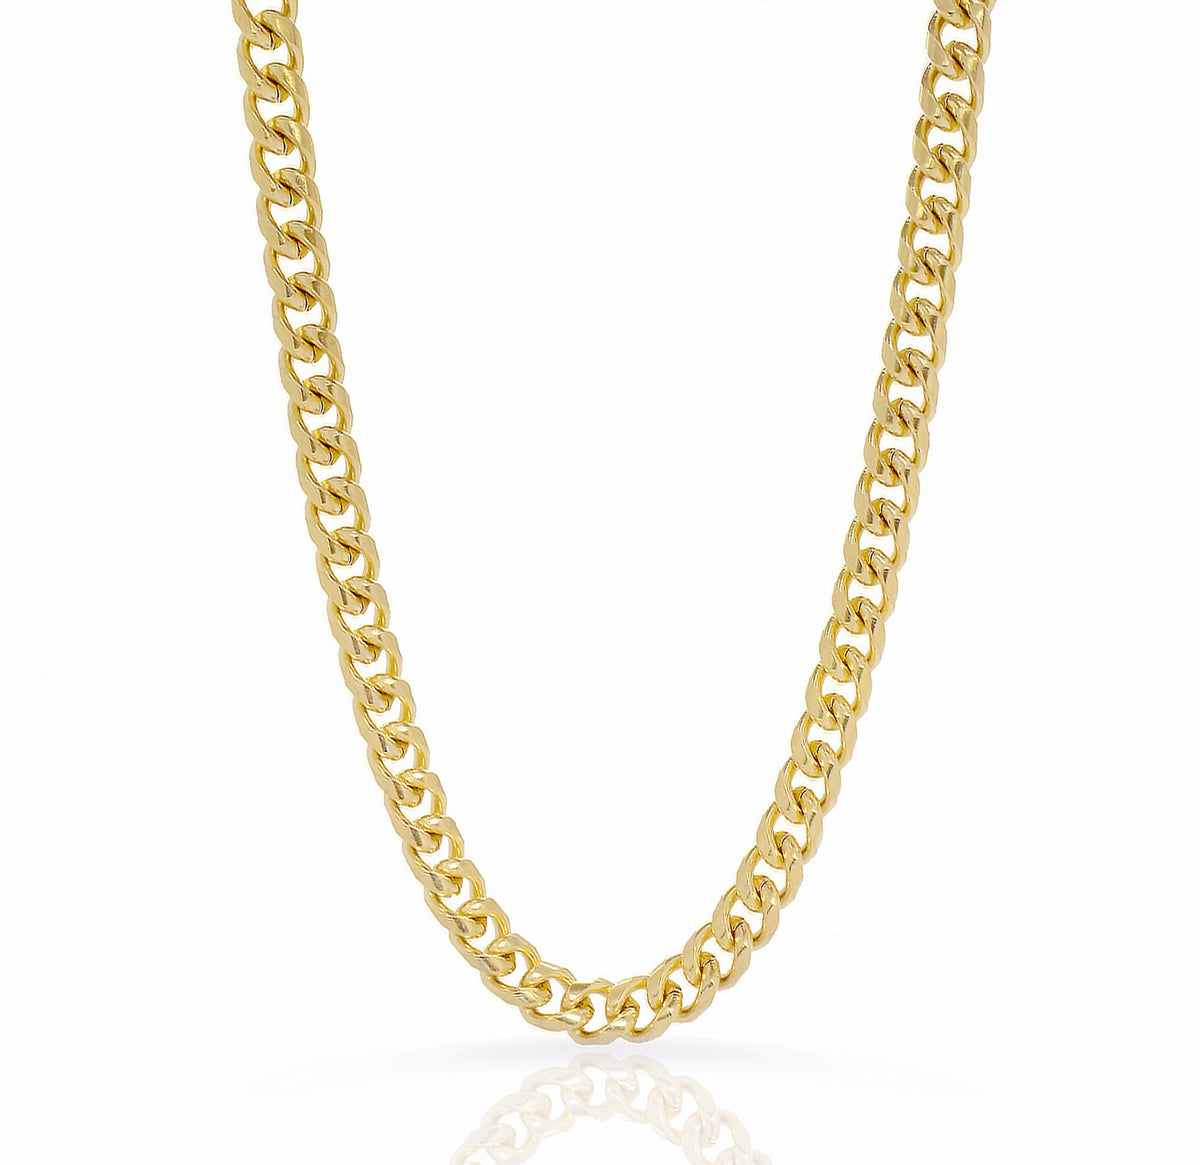 LARGE GOLD CURB CHAIN NECKLACE ADJUSTABLE AND WATERPROOF